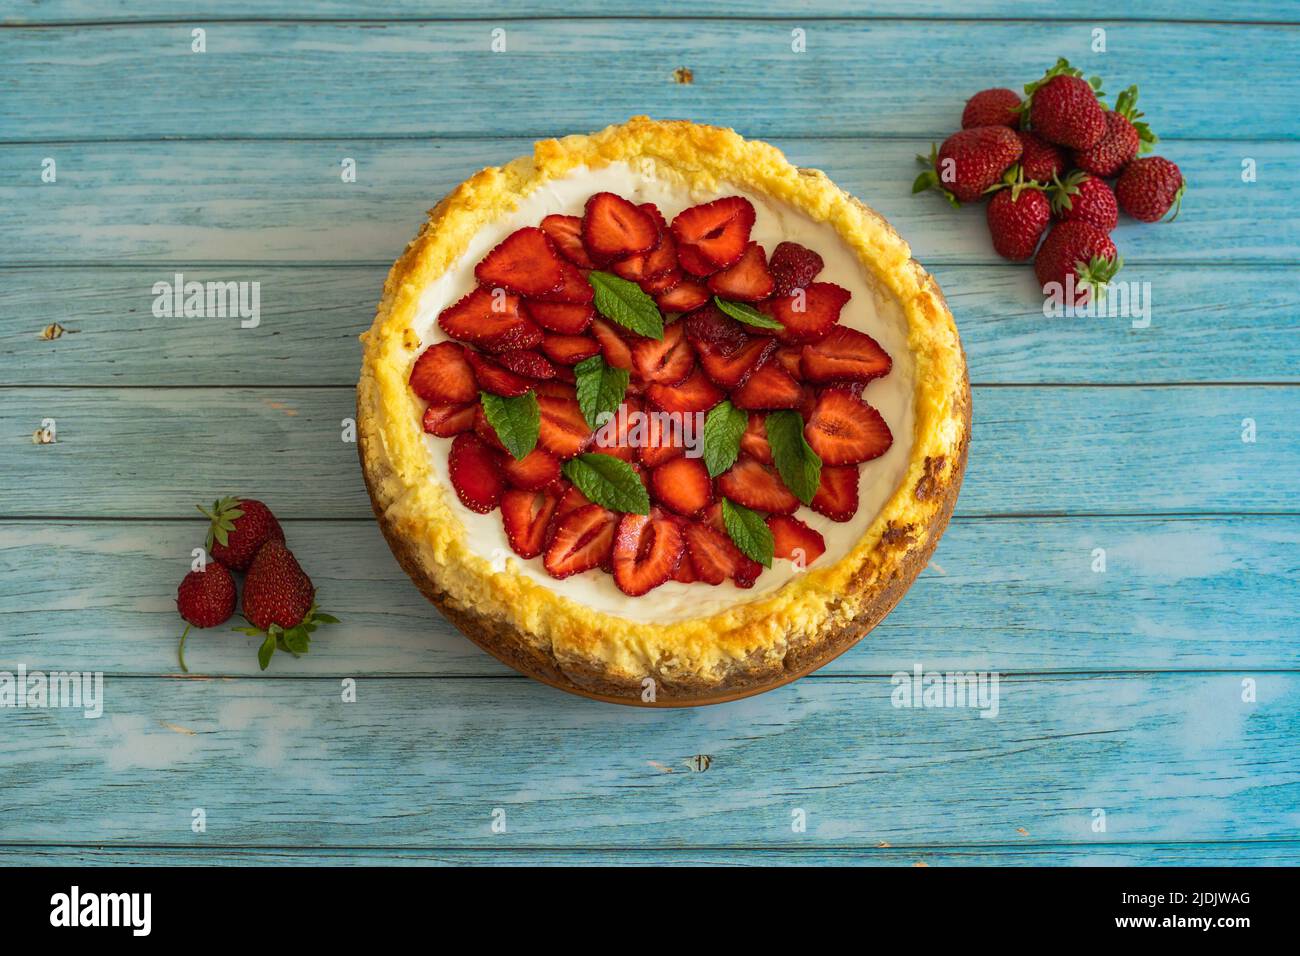 Strawberry homemade cake on wooden table.Delicious cheesecake with strawberries decorated with mint leaves.Top view.Healthy organic summer berry Stock Photo